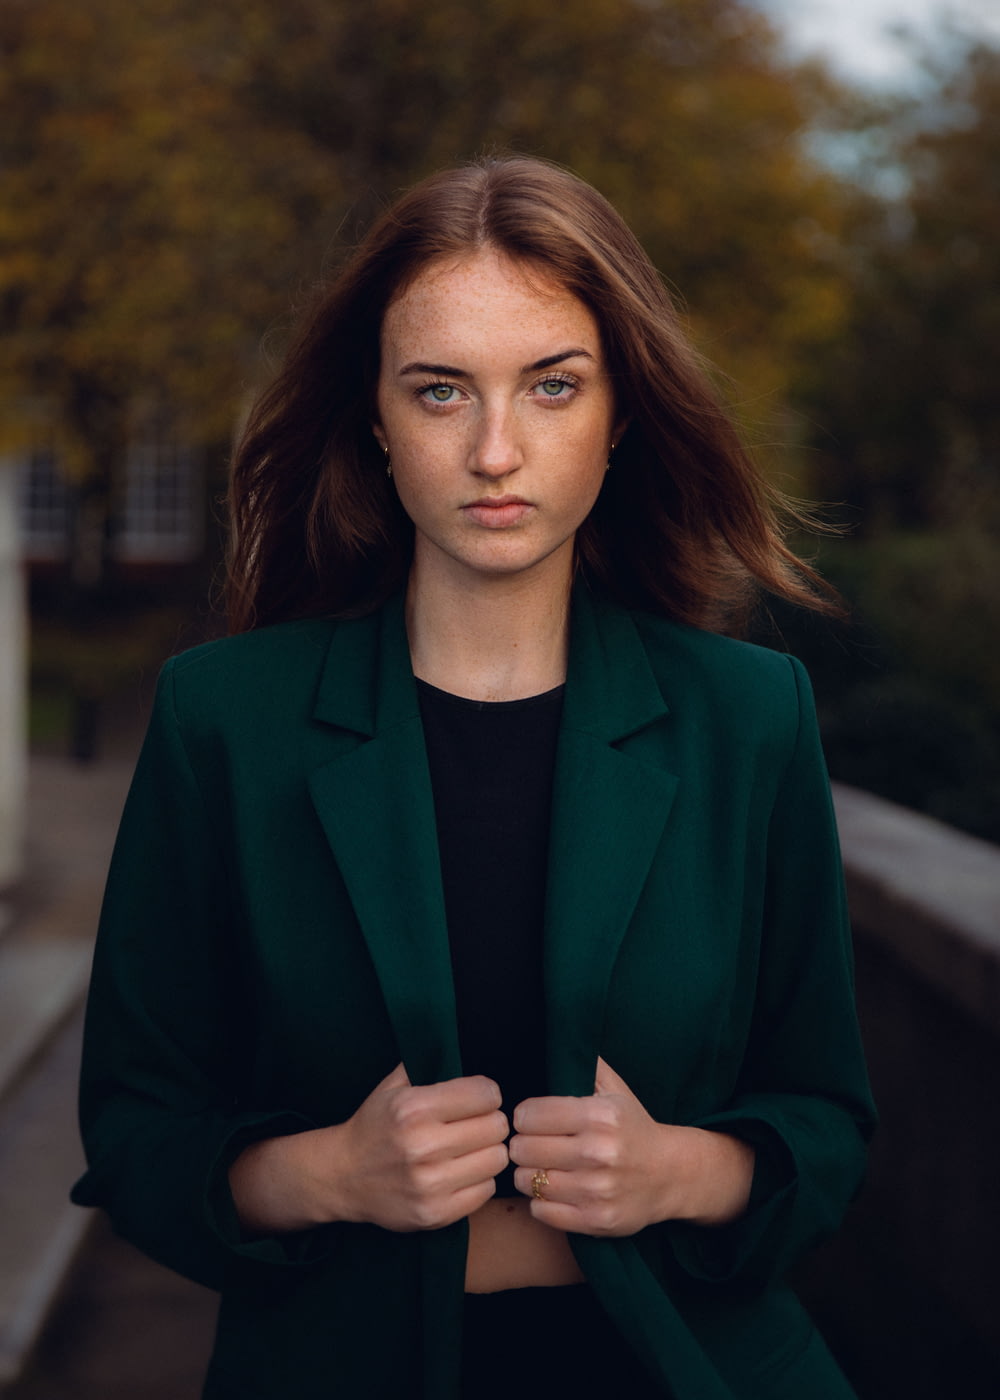 a woman in a green jacket and black shirt